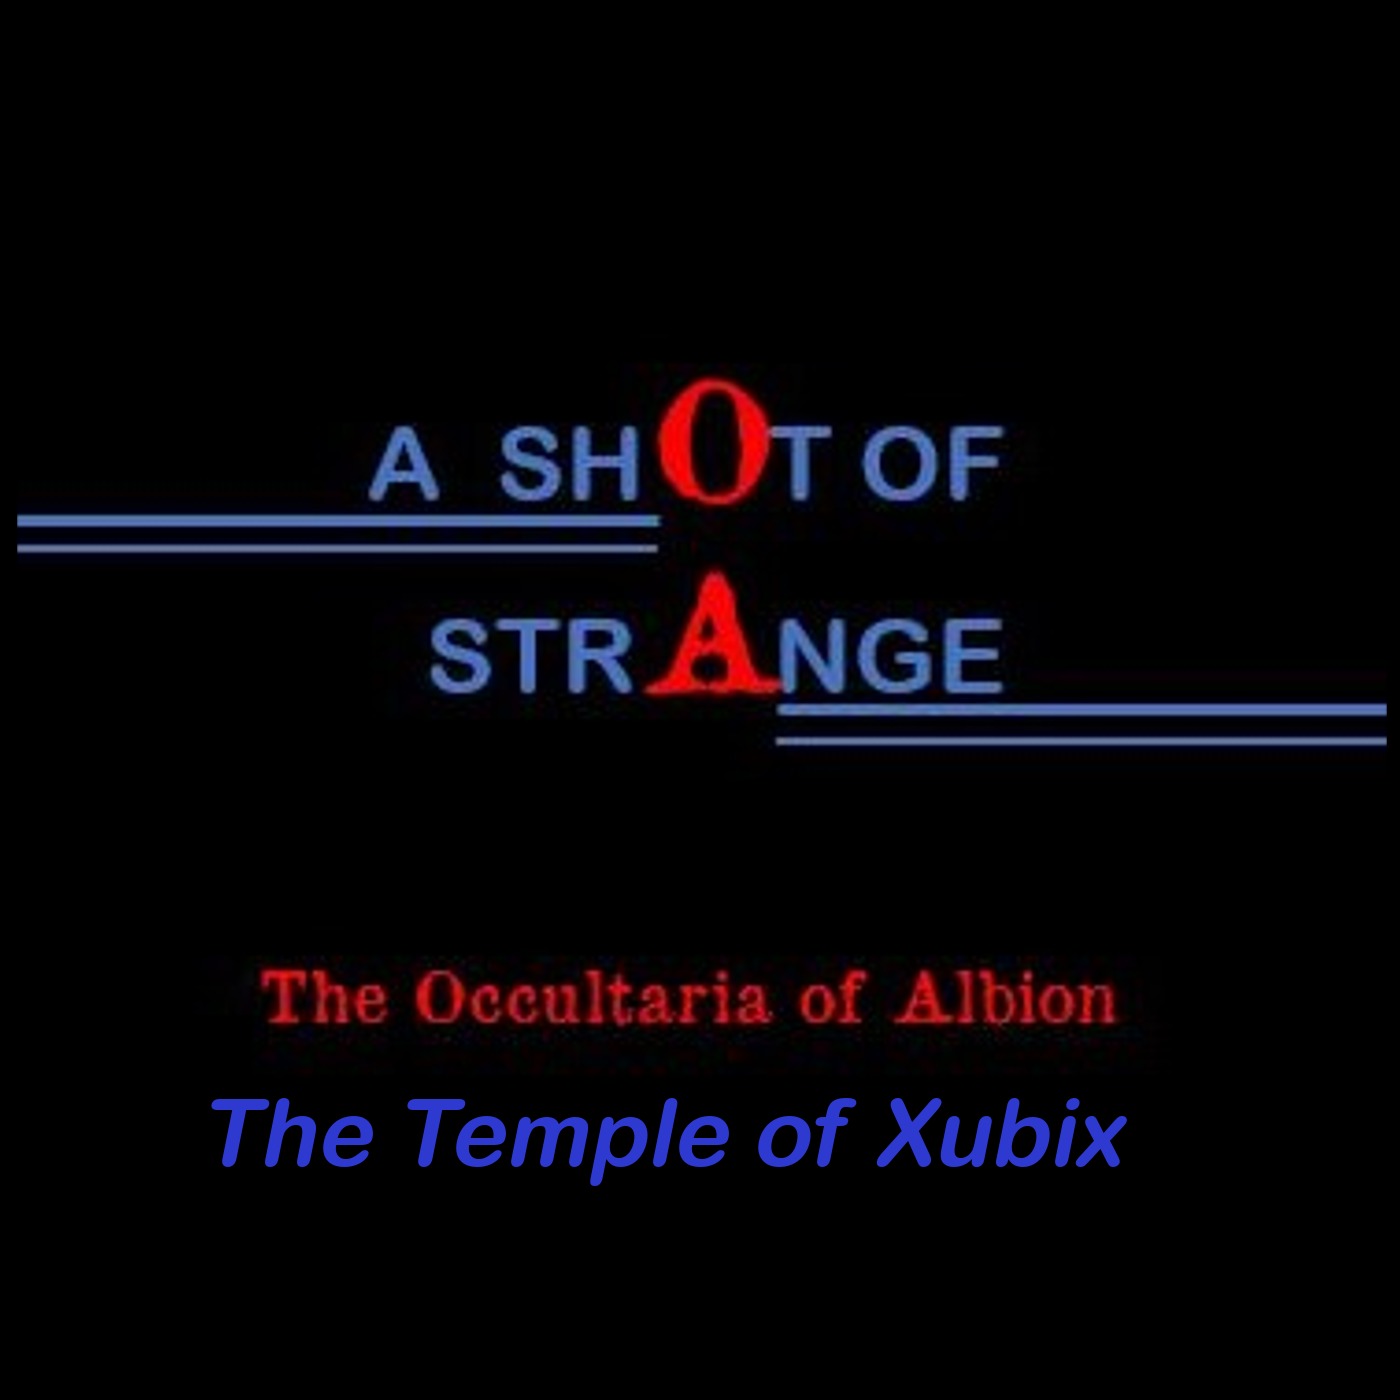 A Shot of Strange: 9. The Temple of Xubix